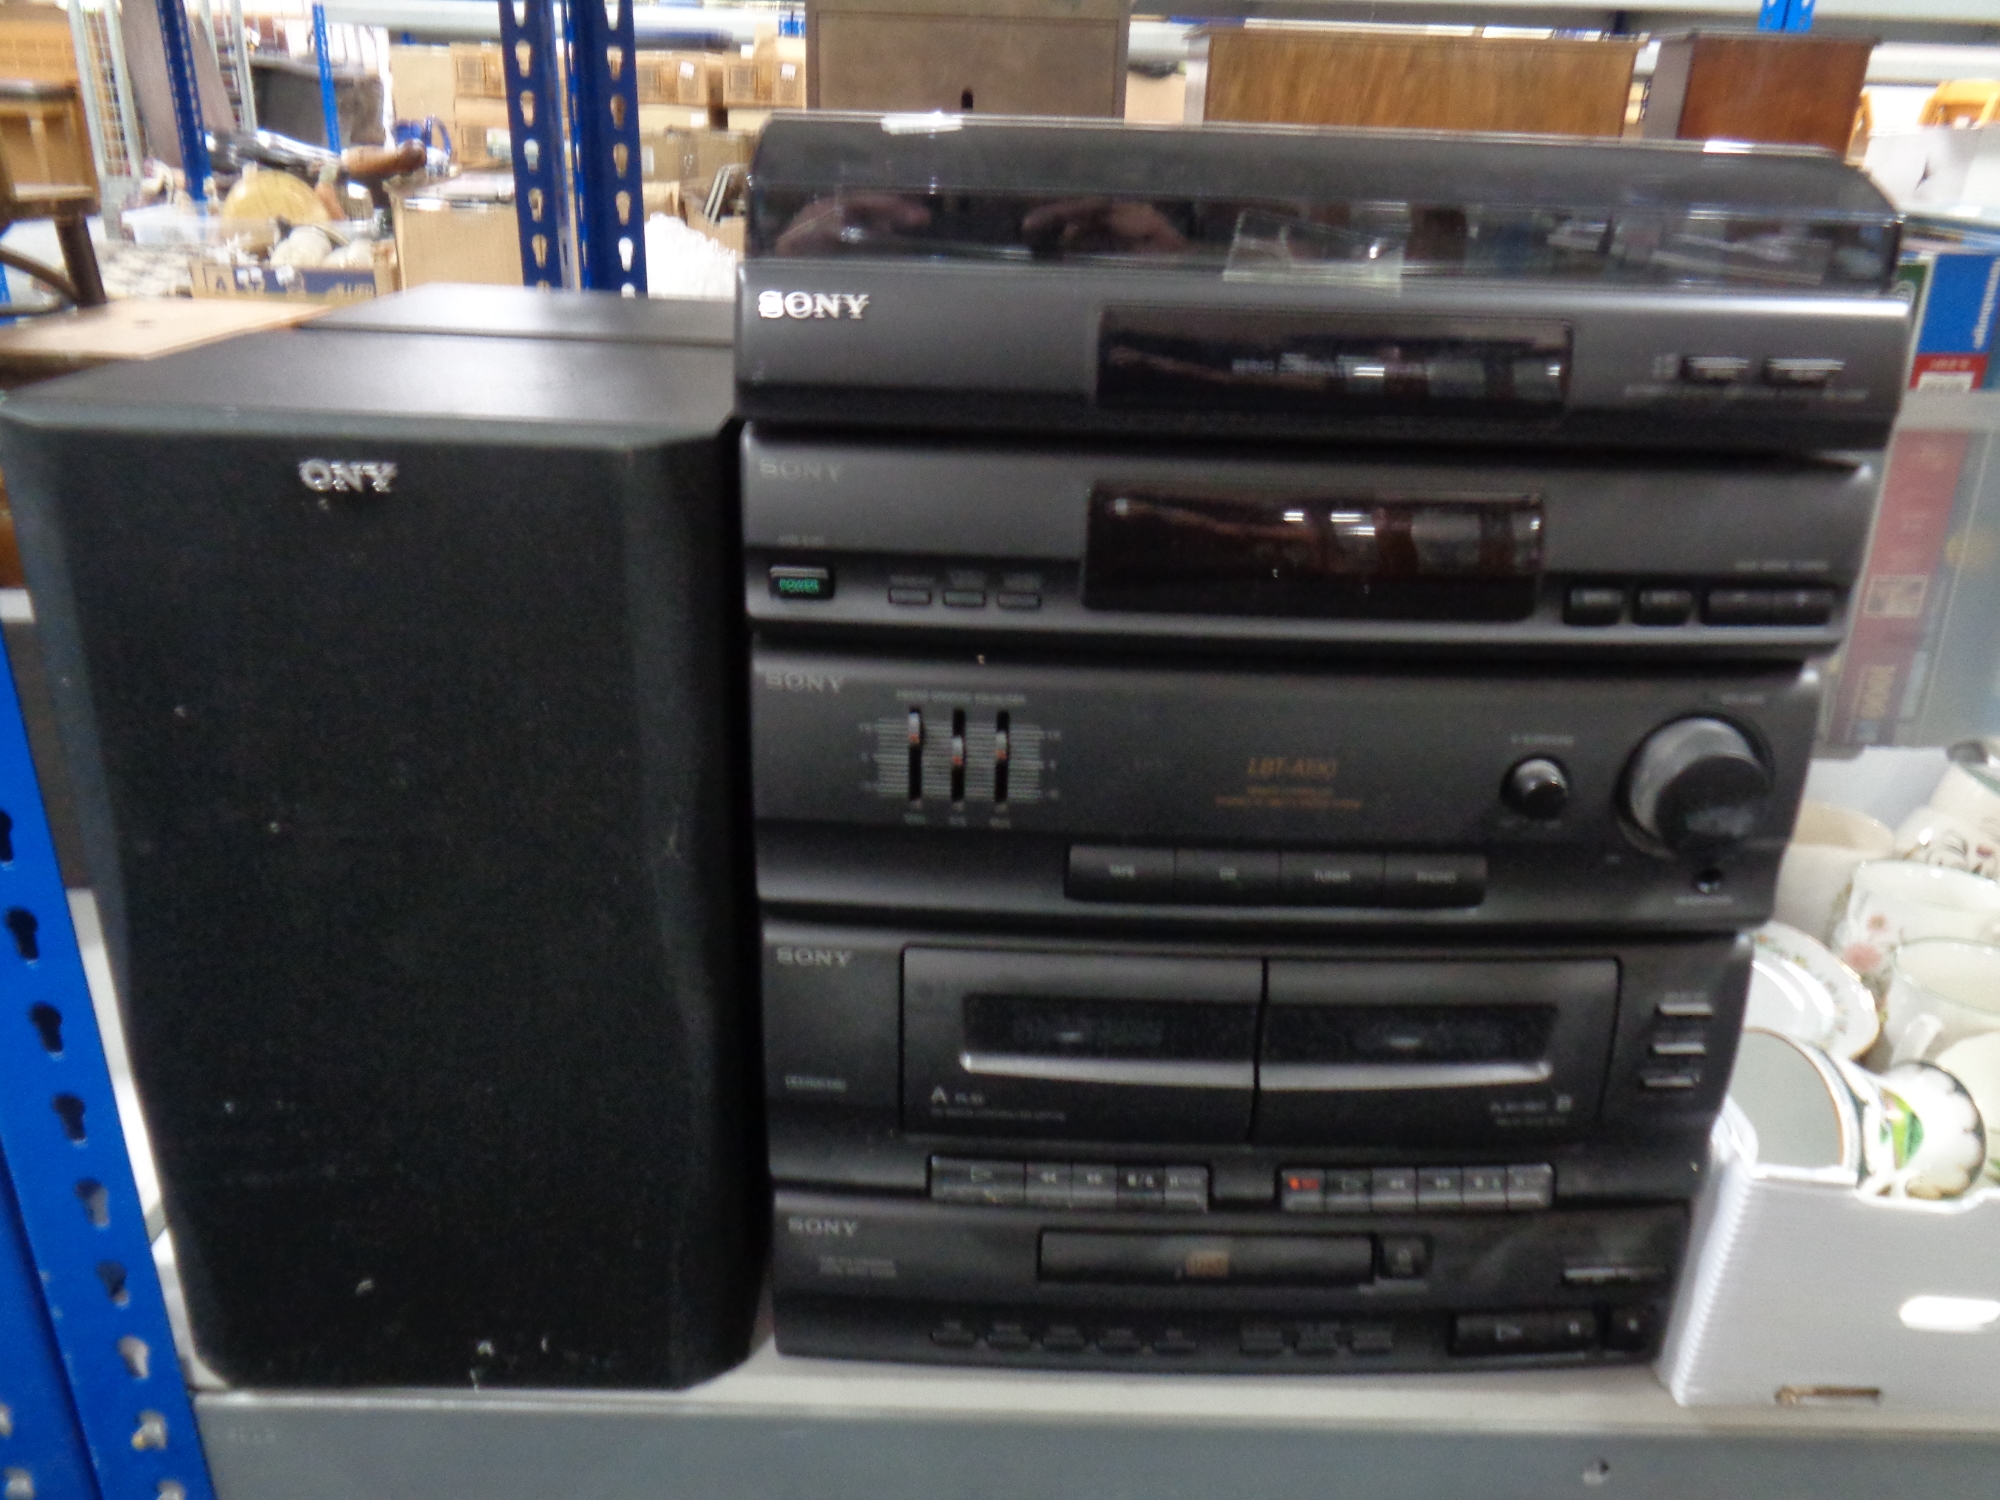 A Sony hifi and pair of speakers